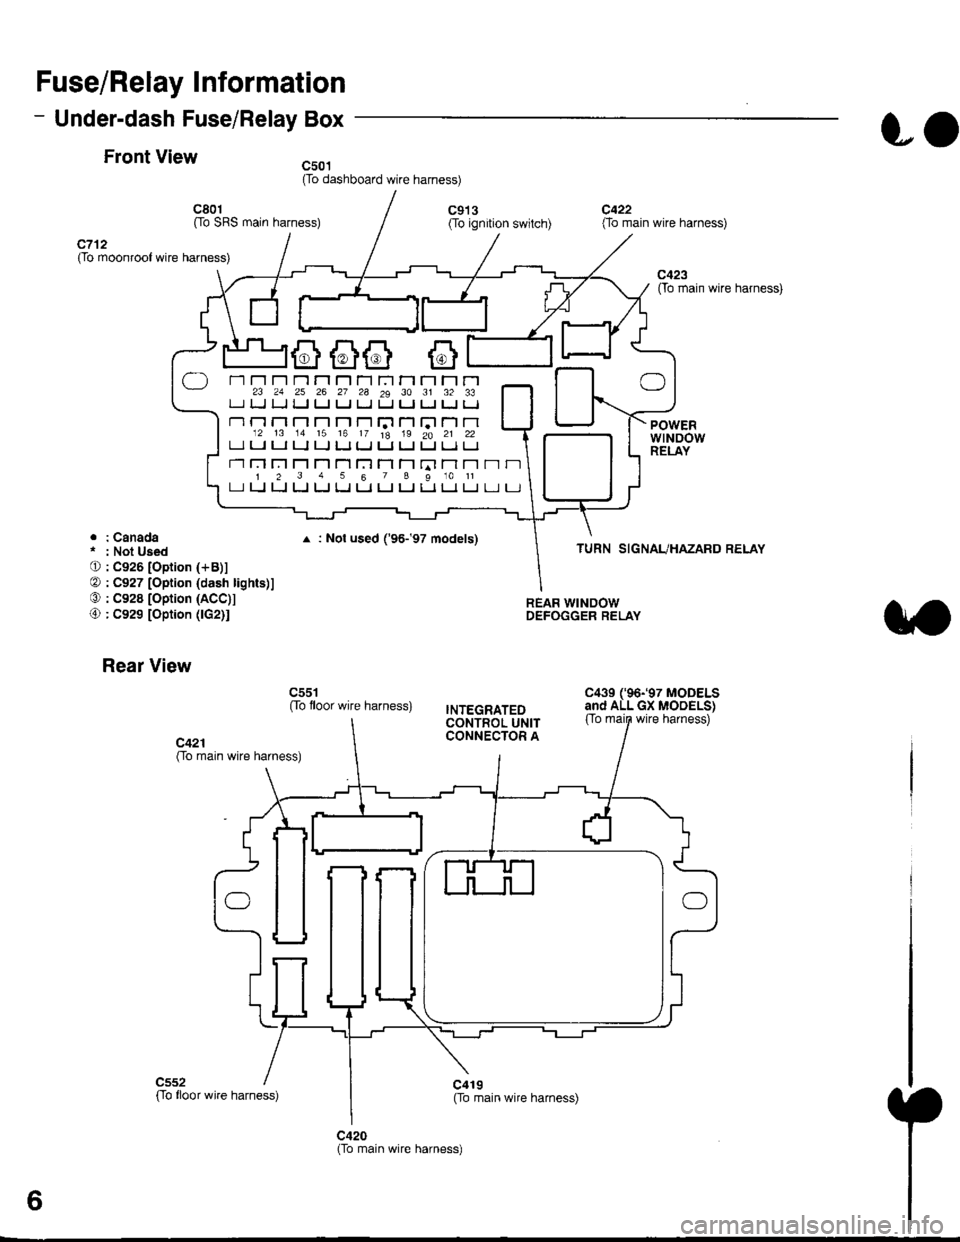 HONDA CIVIC 1998 6.G User Guide Fuse/Relay Information
- Under-dash Fuse/Relay Box
Front View
c712(To moonroof wire harness)
. : Canadai : Not UsedO : C926 loprion (+B)l
@ : C927 loption (dash lights)]
O : C928 [Option (ACC]I
@ : C9